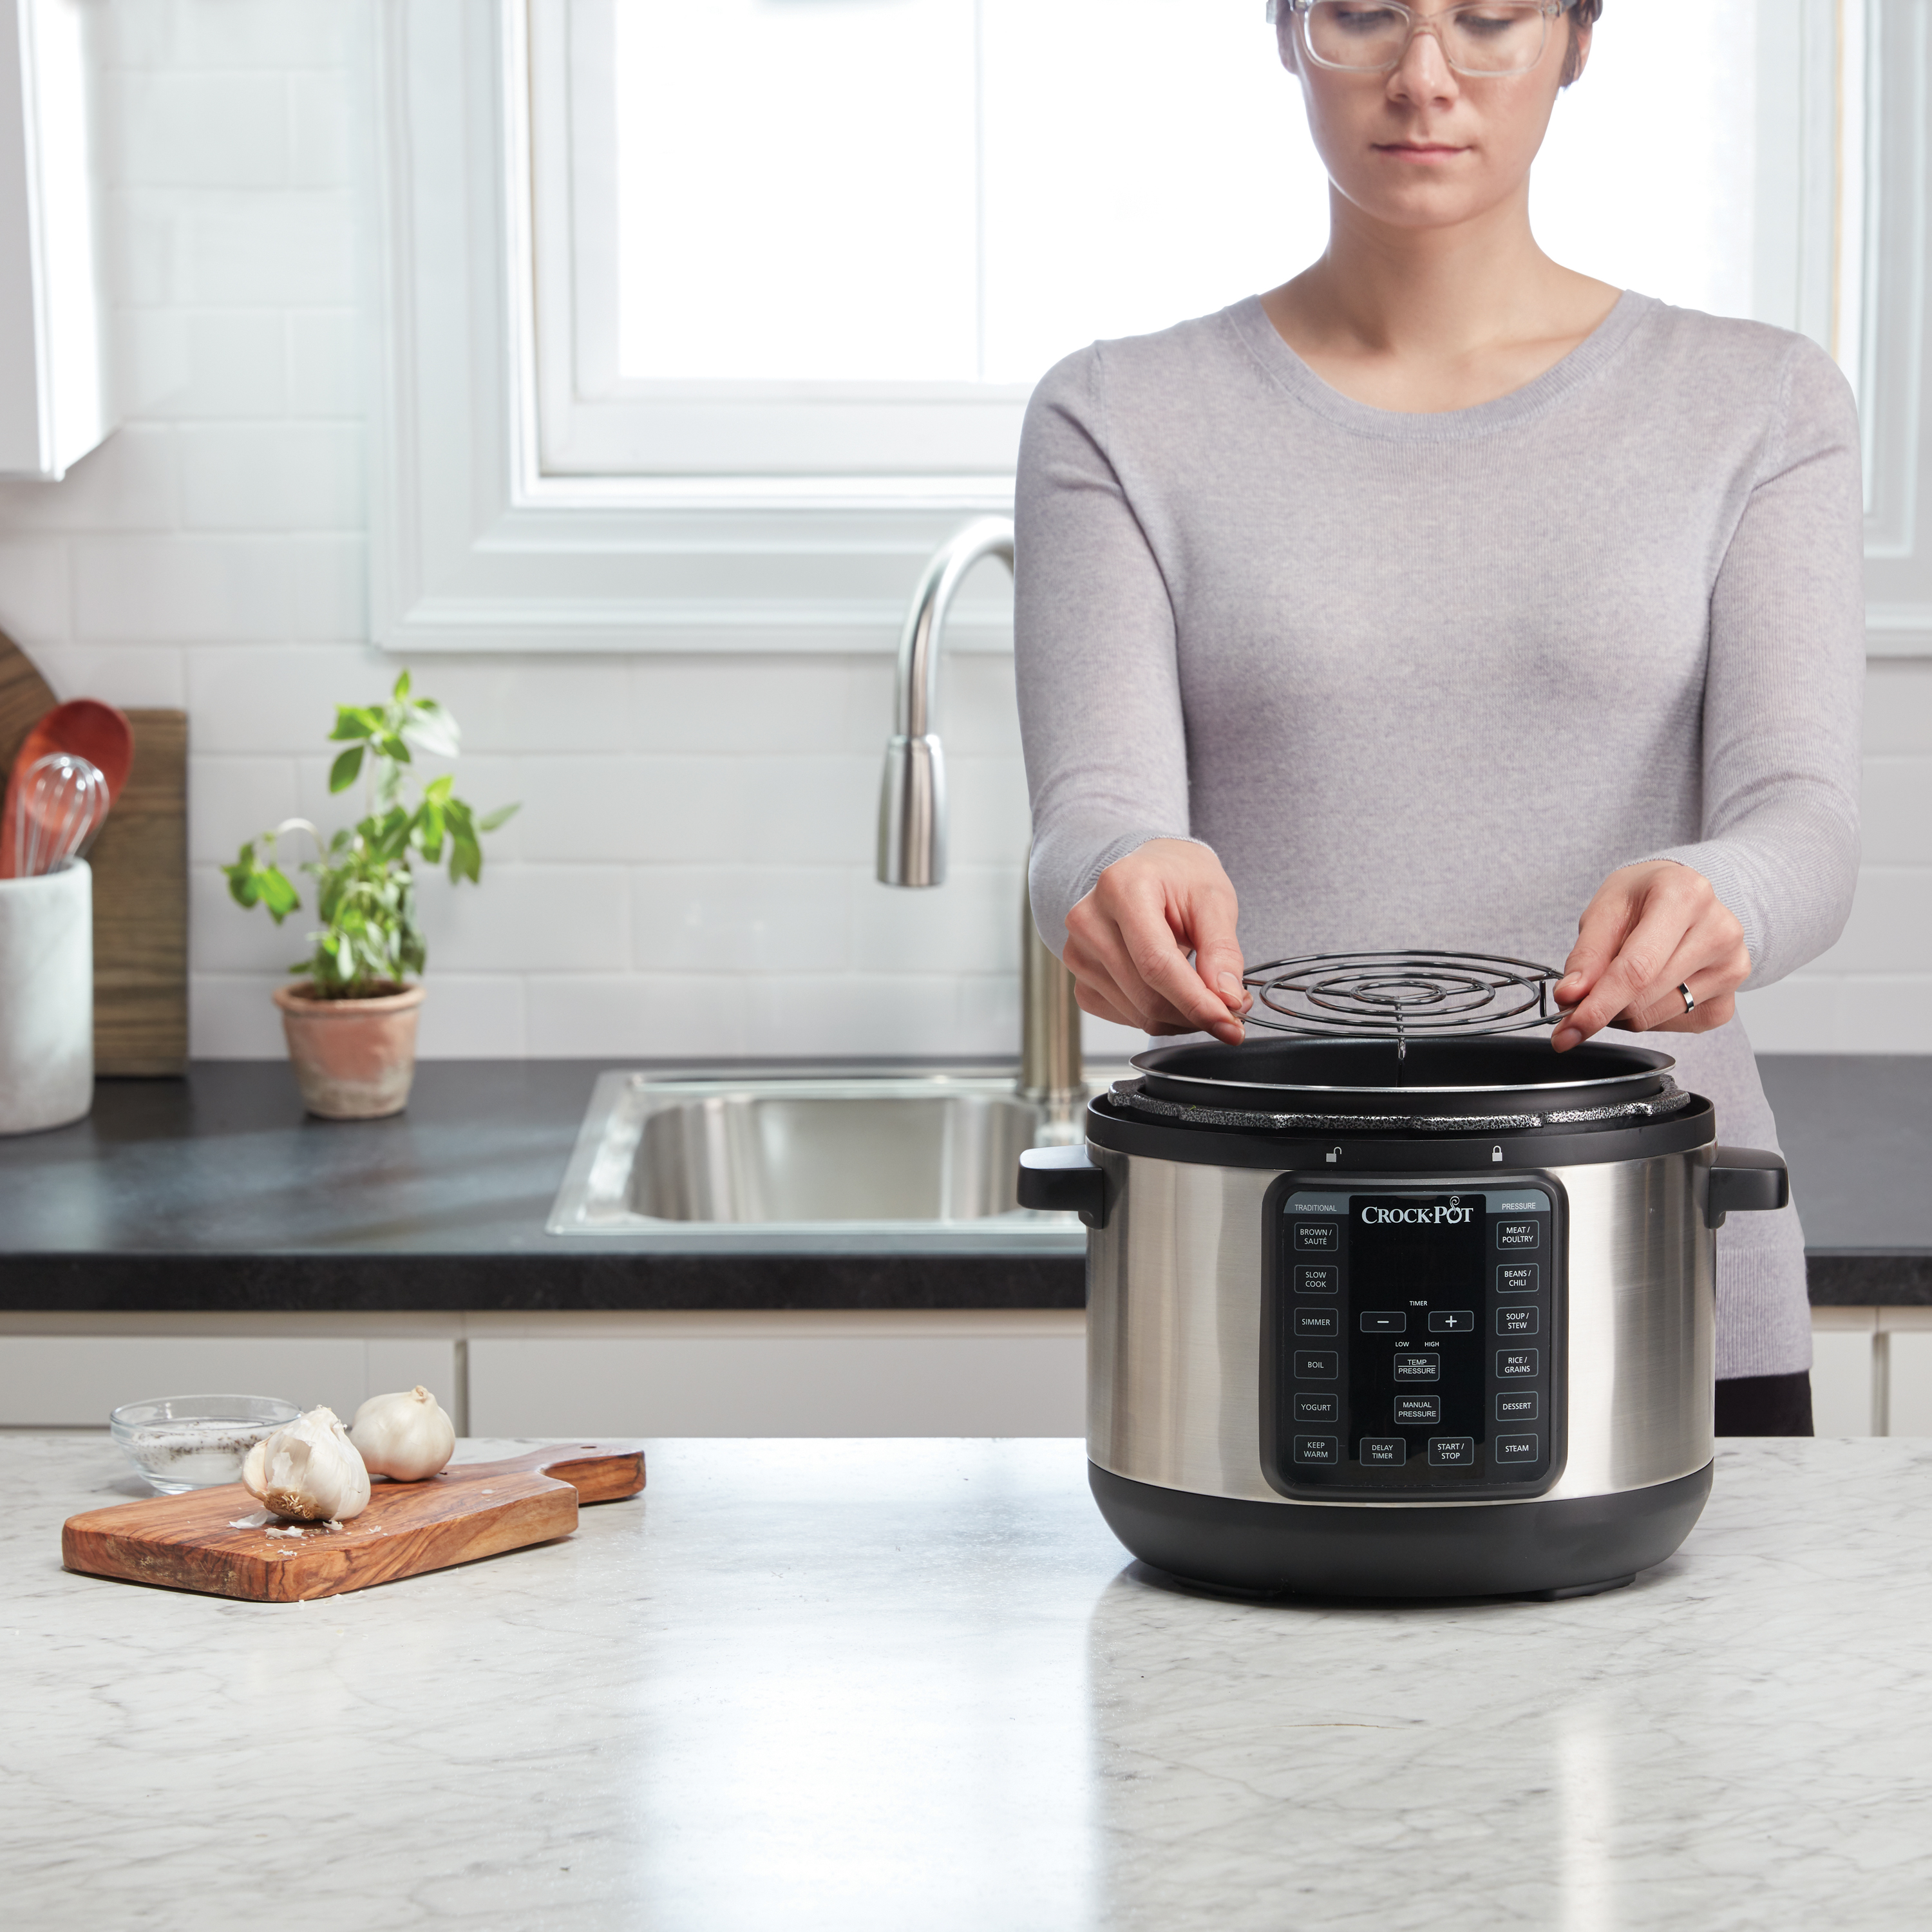 Crock-Pot 4 Quart 8-in-1 Multi-Use Express Crock Programmable Slow Cooker, Pressure Cooker, Sauté, and Steamer in Silver - image 4 of 9